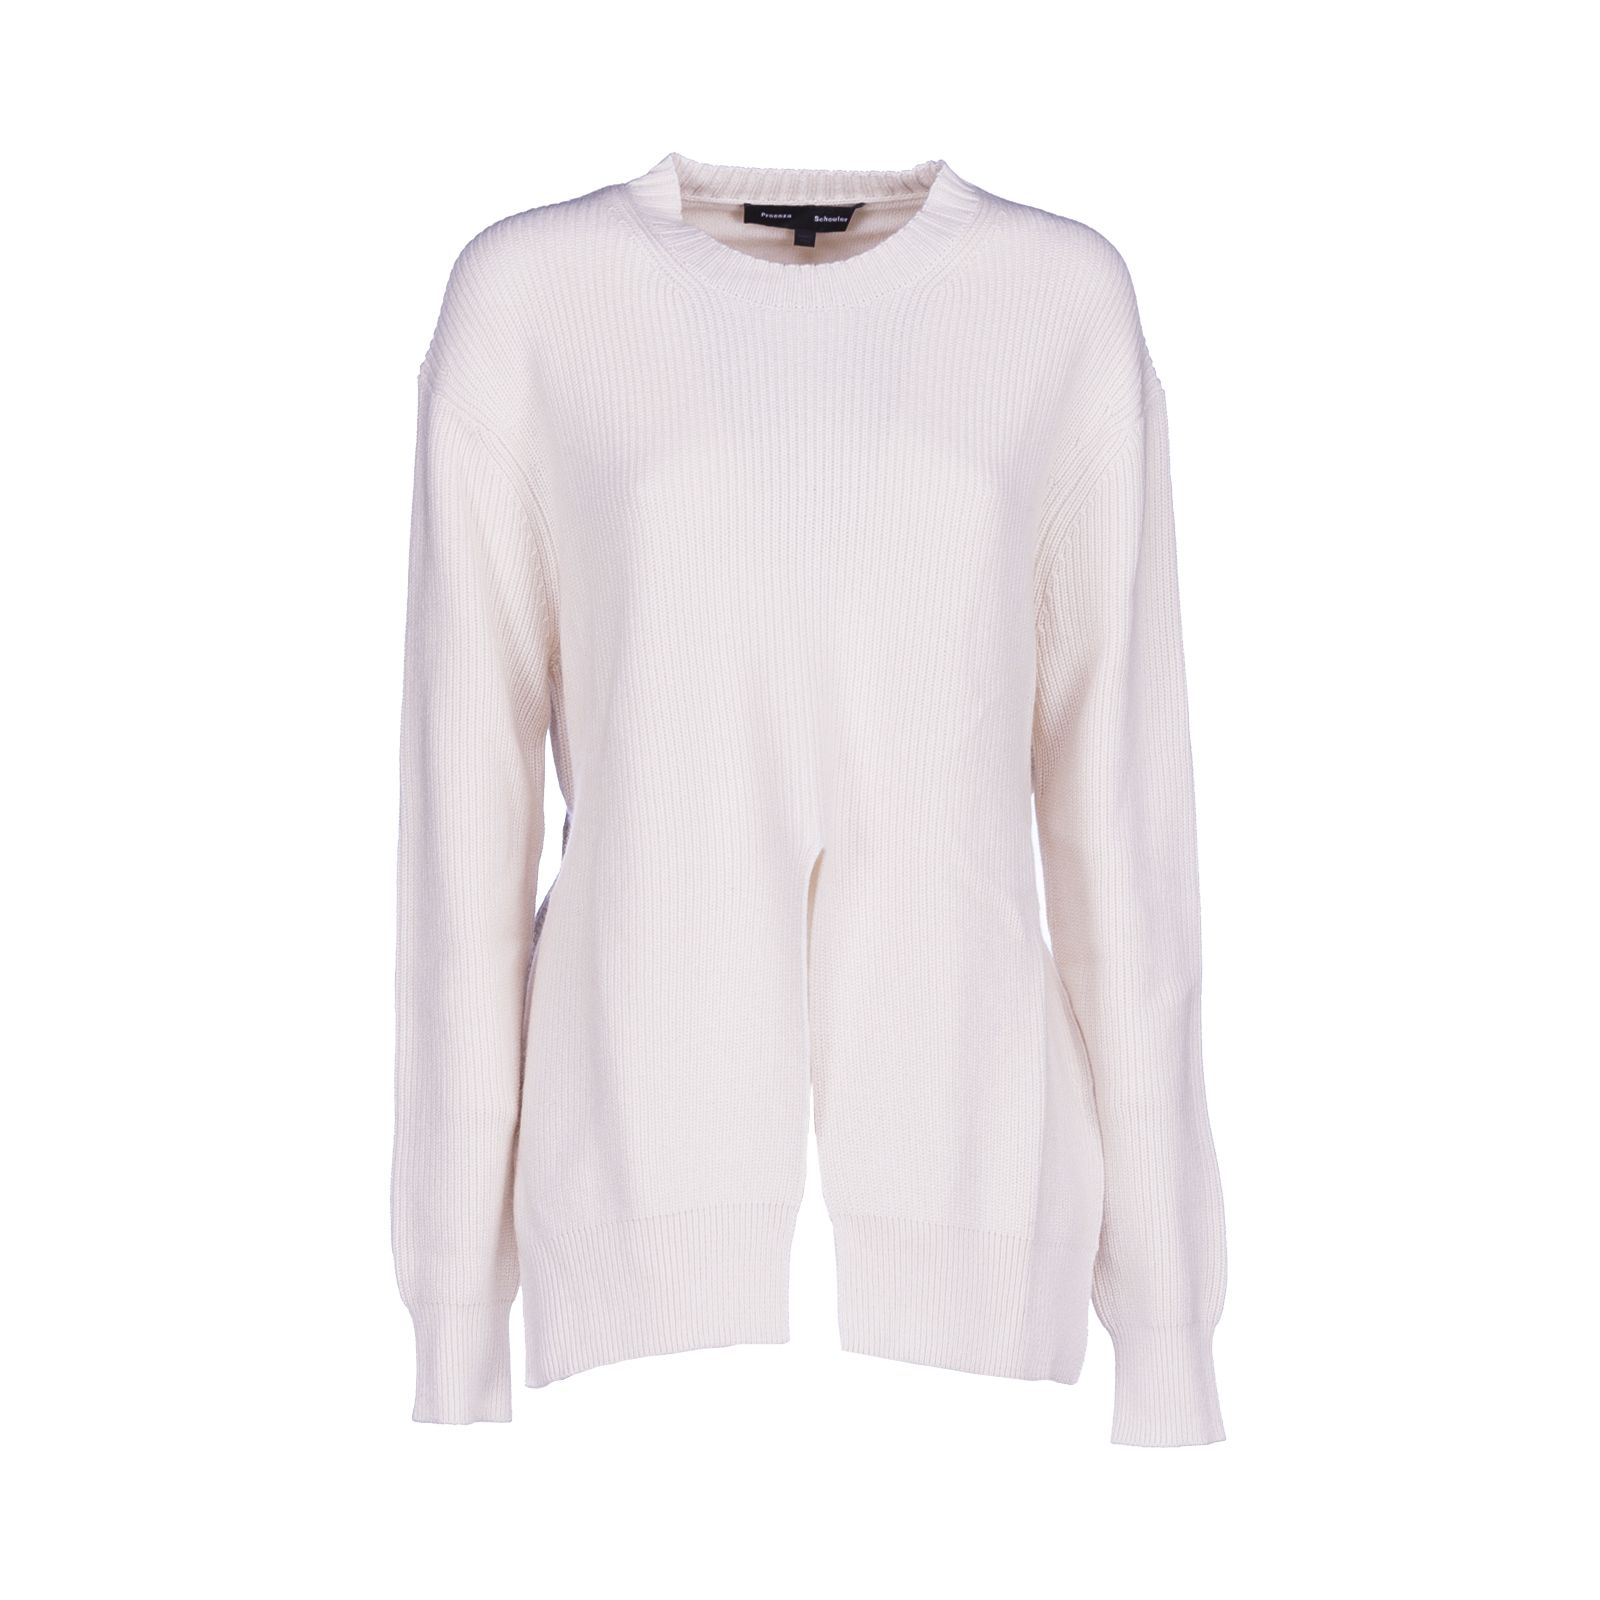 Proenza Schouler Wool And Cashmere Sweater, Off White | ModeSens